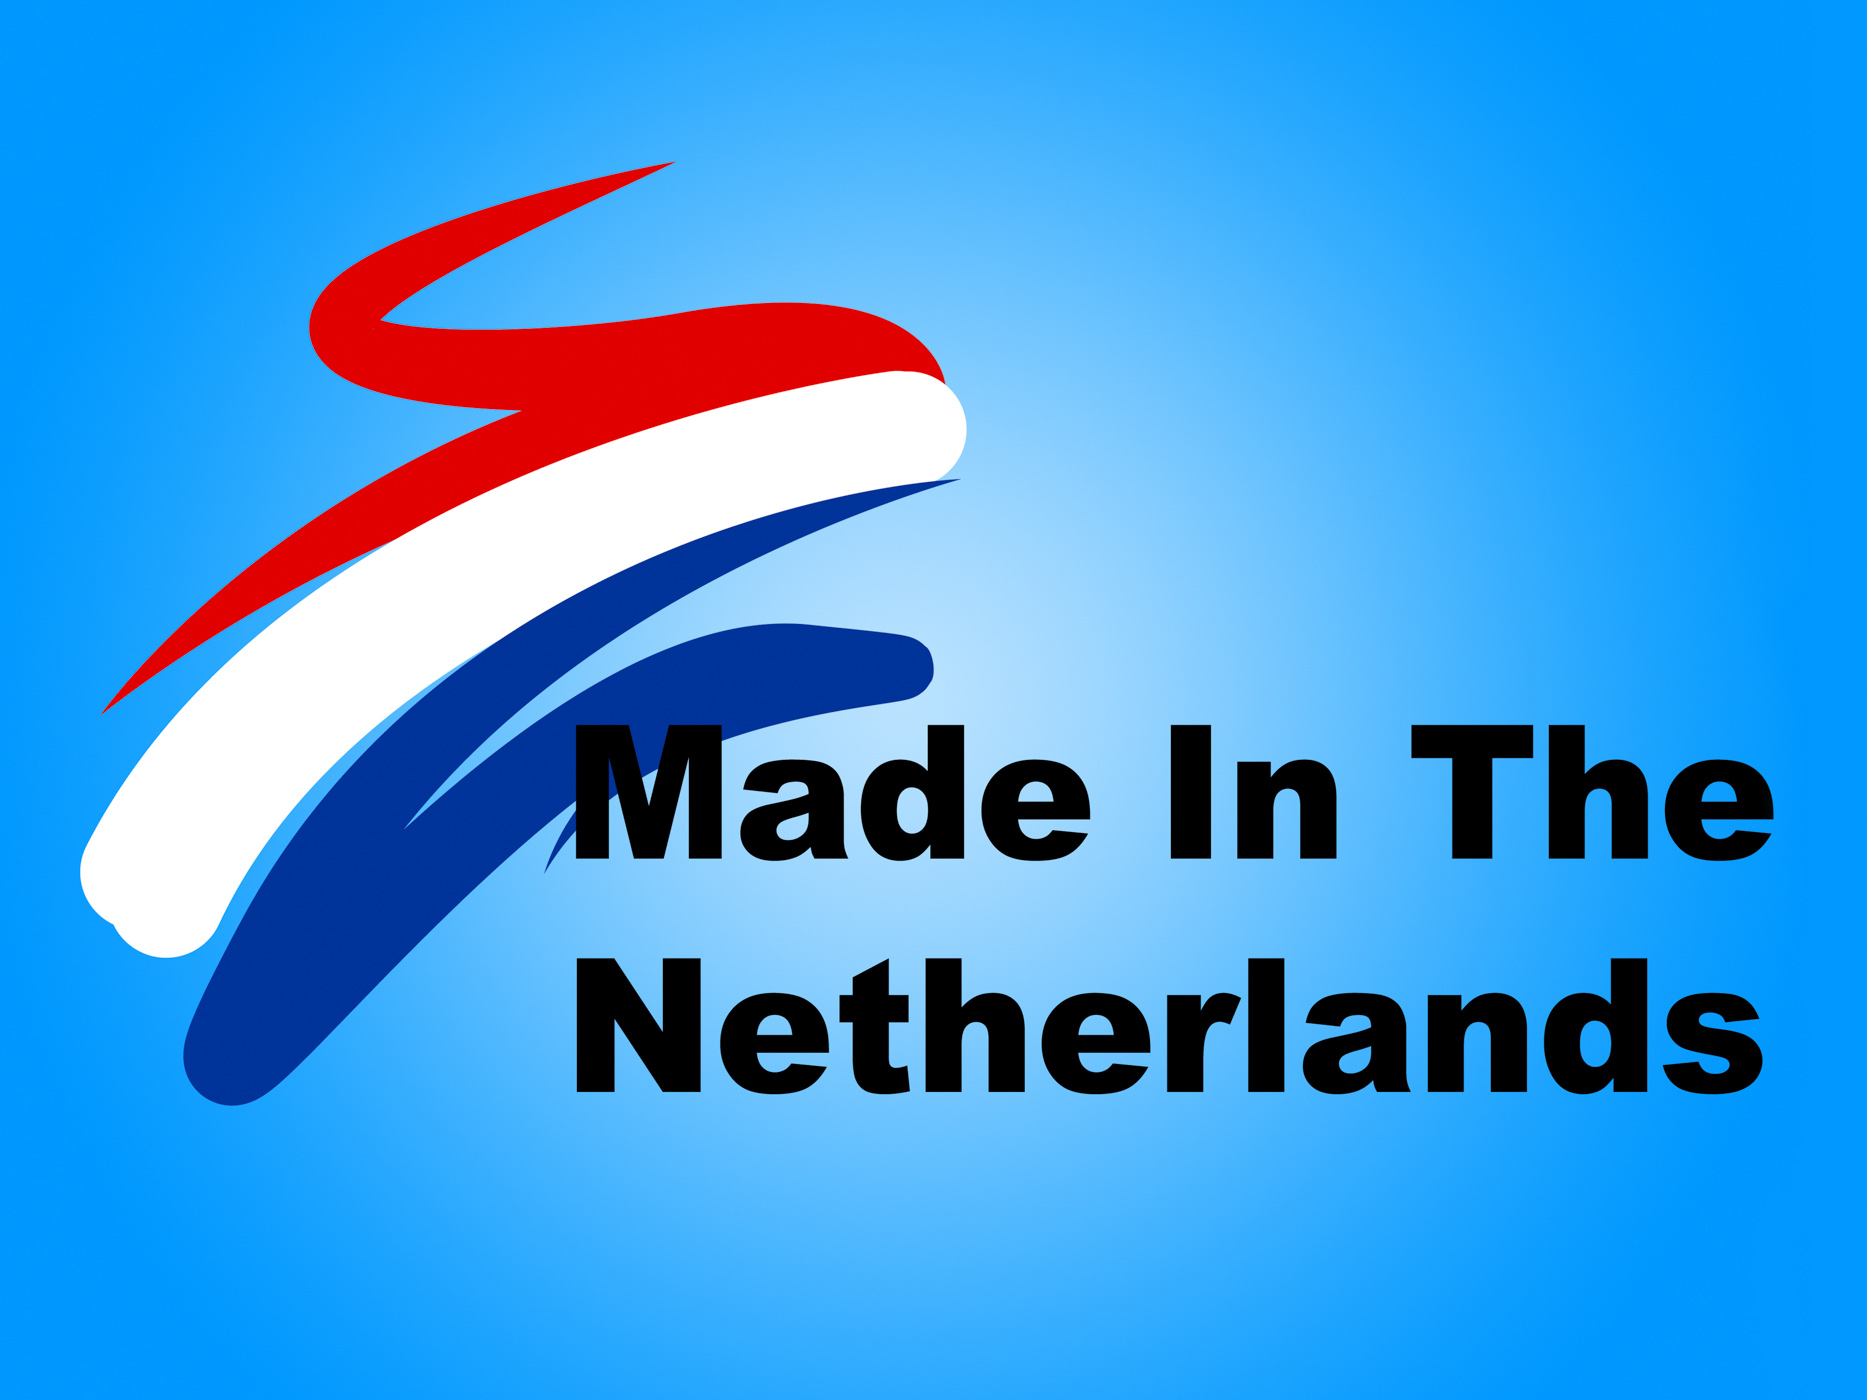 Trade manufacturing represents the netherlands and business photo